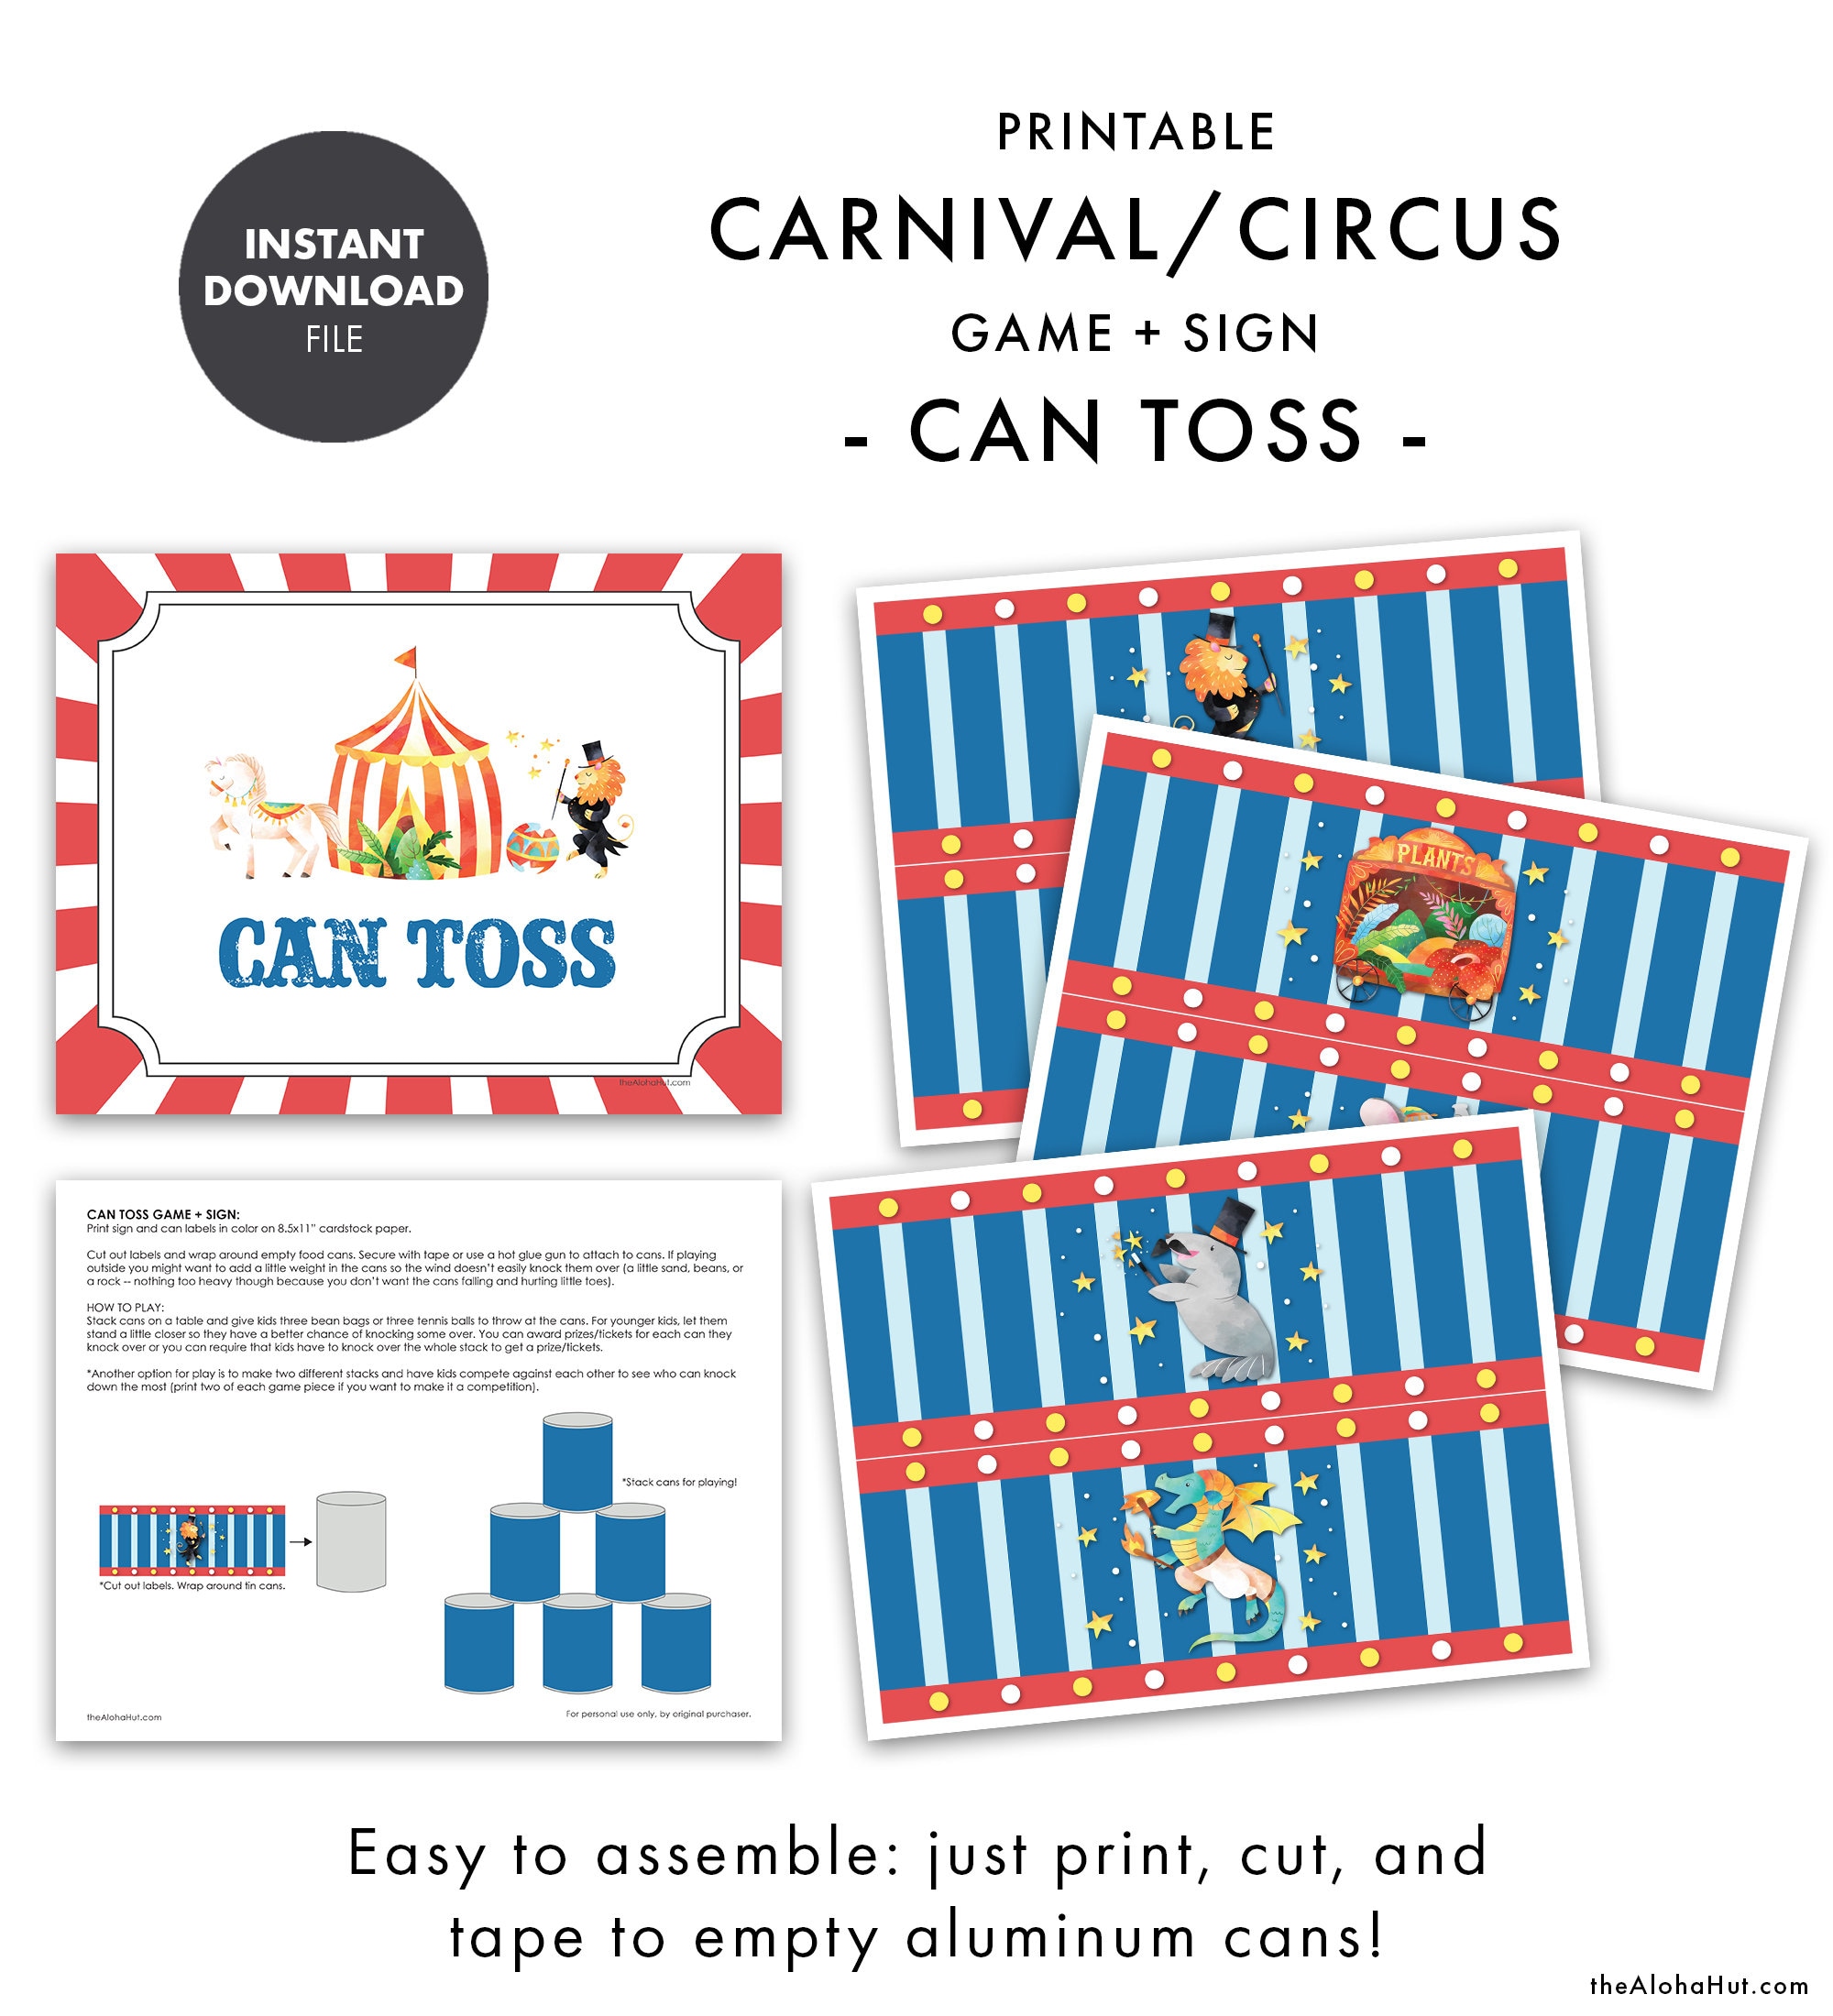 Carnival Fun Pass: Get Your Fill of Games and Treats With This